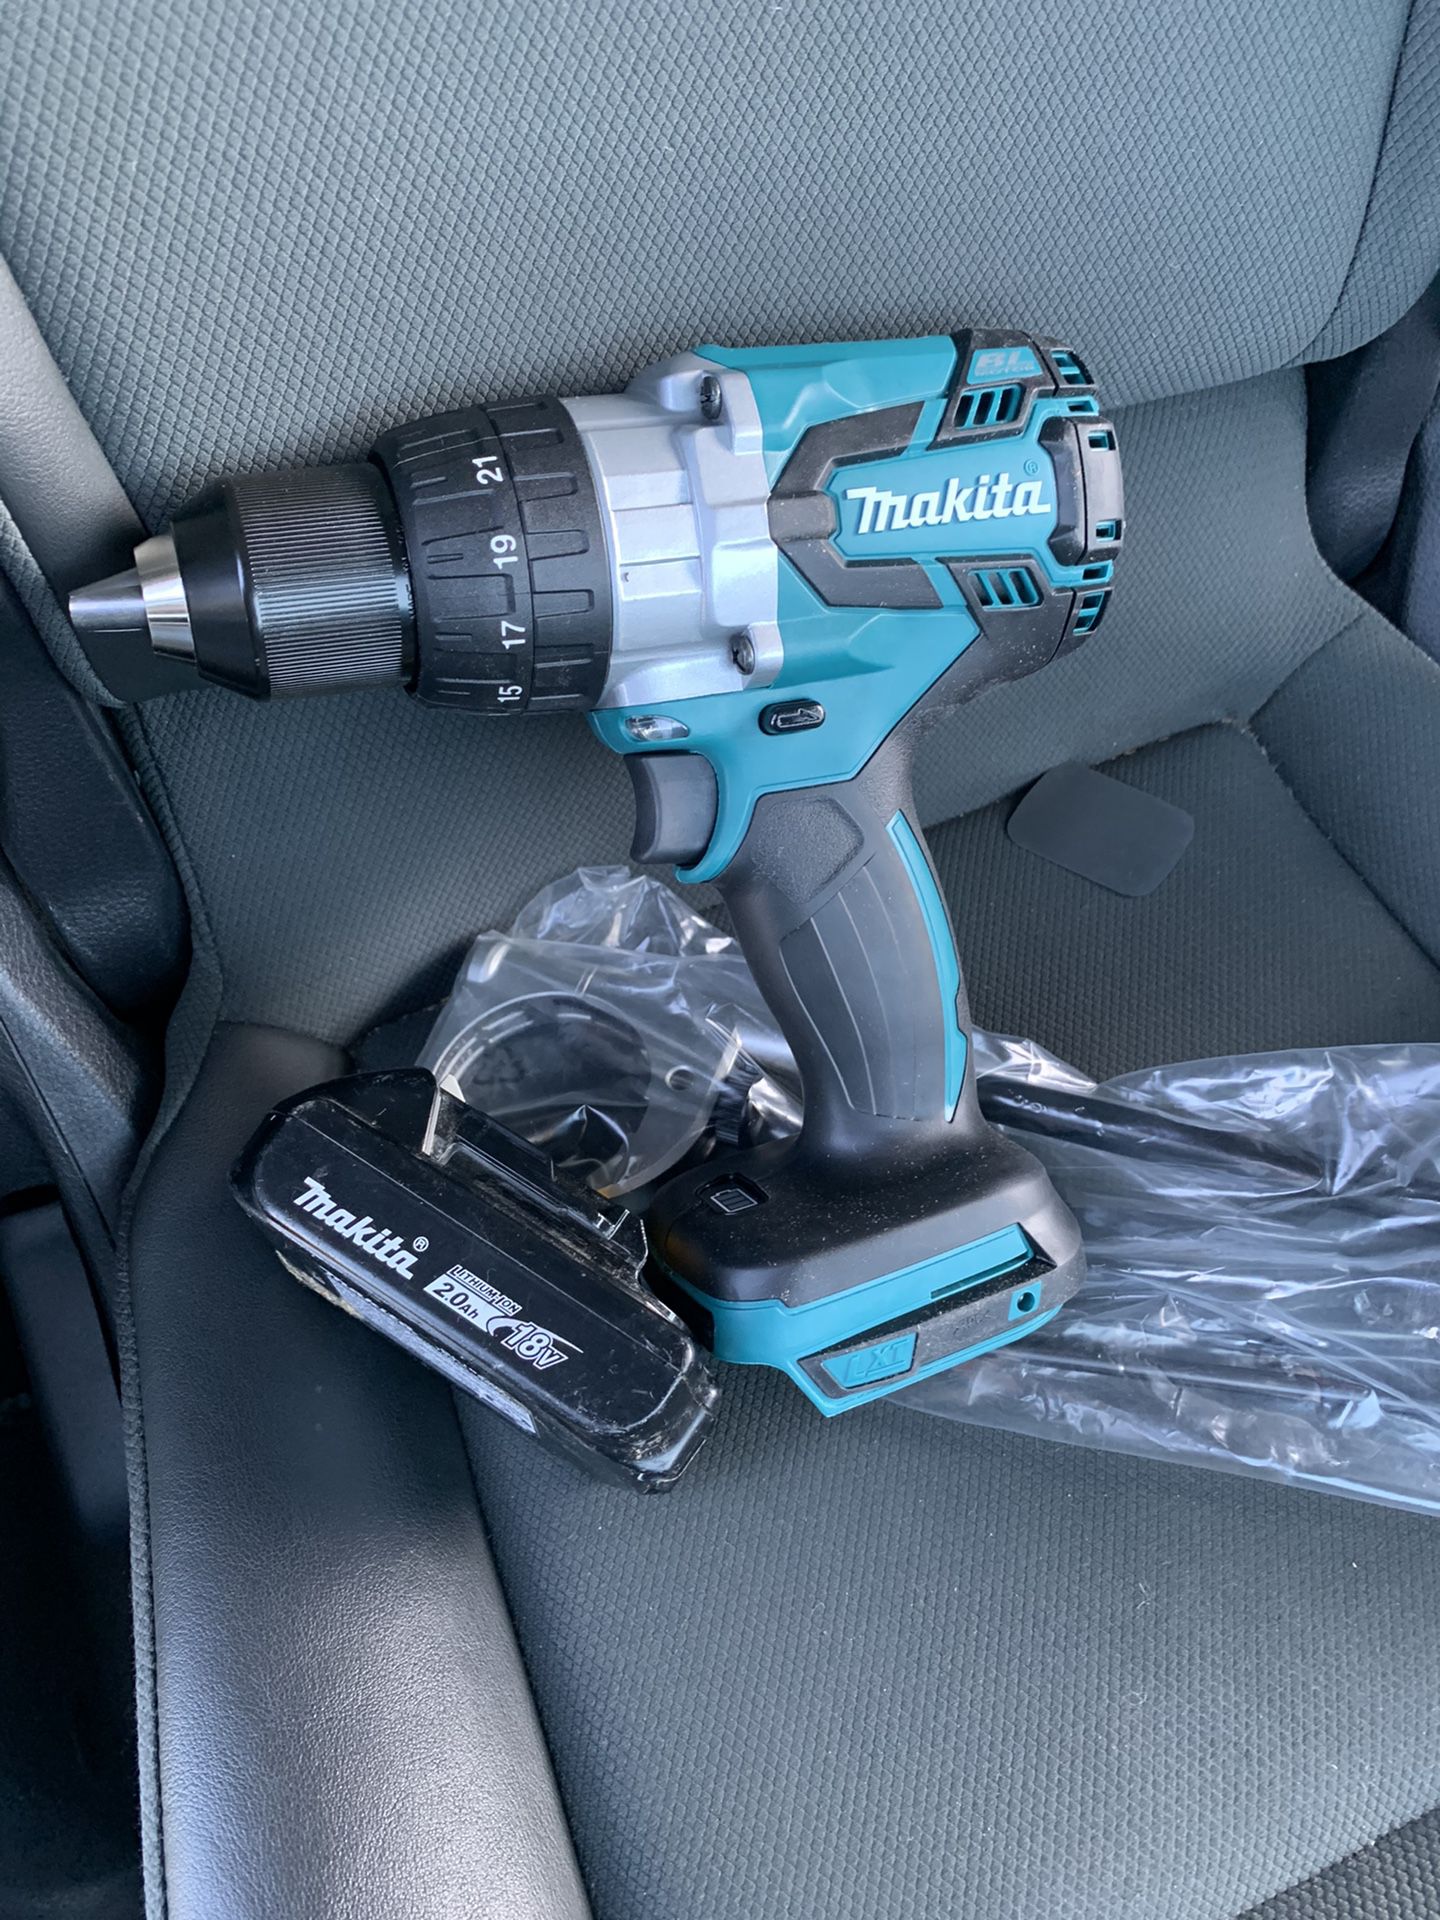 Brand new Makita 18-Volt LXT Lithium-Ion Brushless Cordless 1/2 in. XPT Hammer Drill/Driver (Tool & a use battery 🔋)